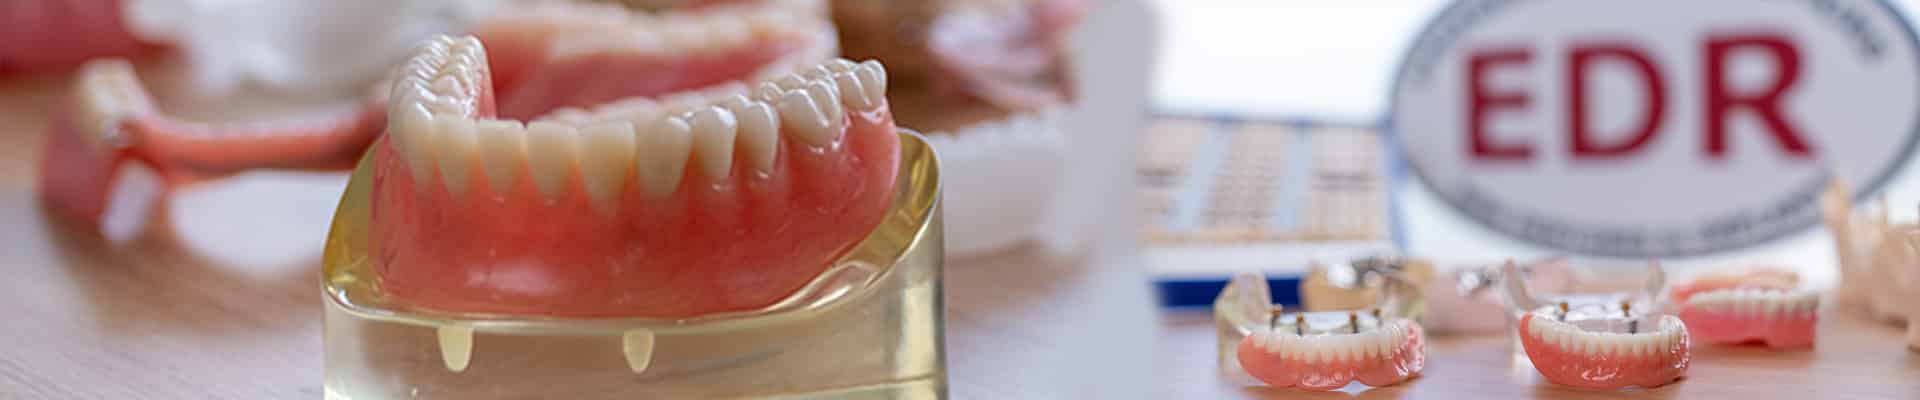 different shapes and sizes of dentures